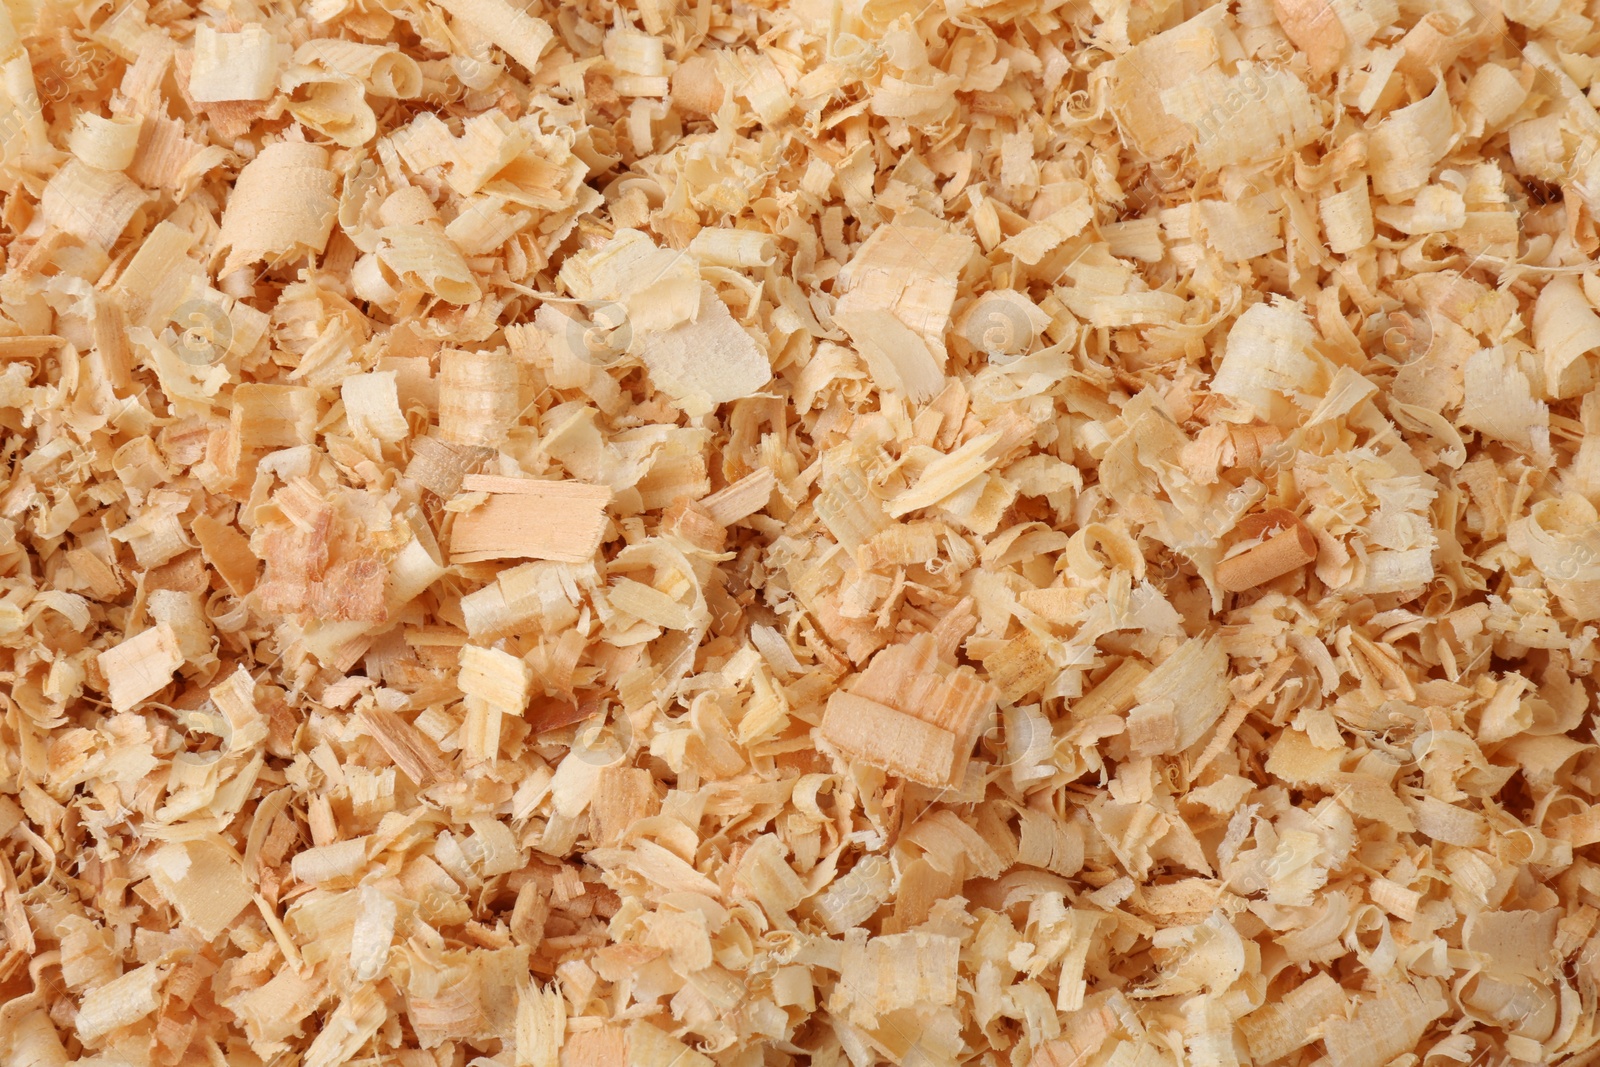 Photo of Pile of natural sawdust as background, top view